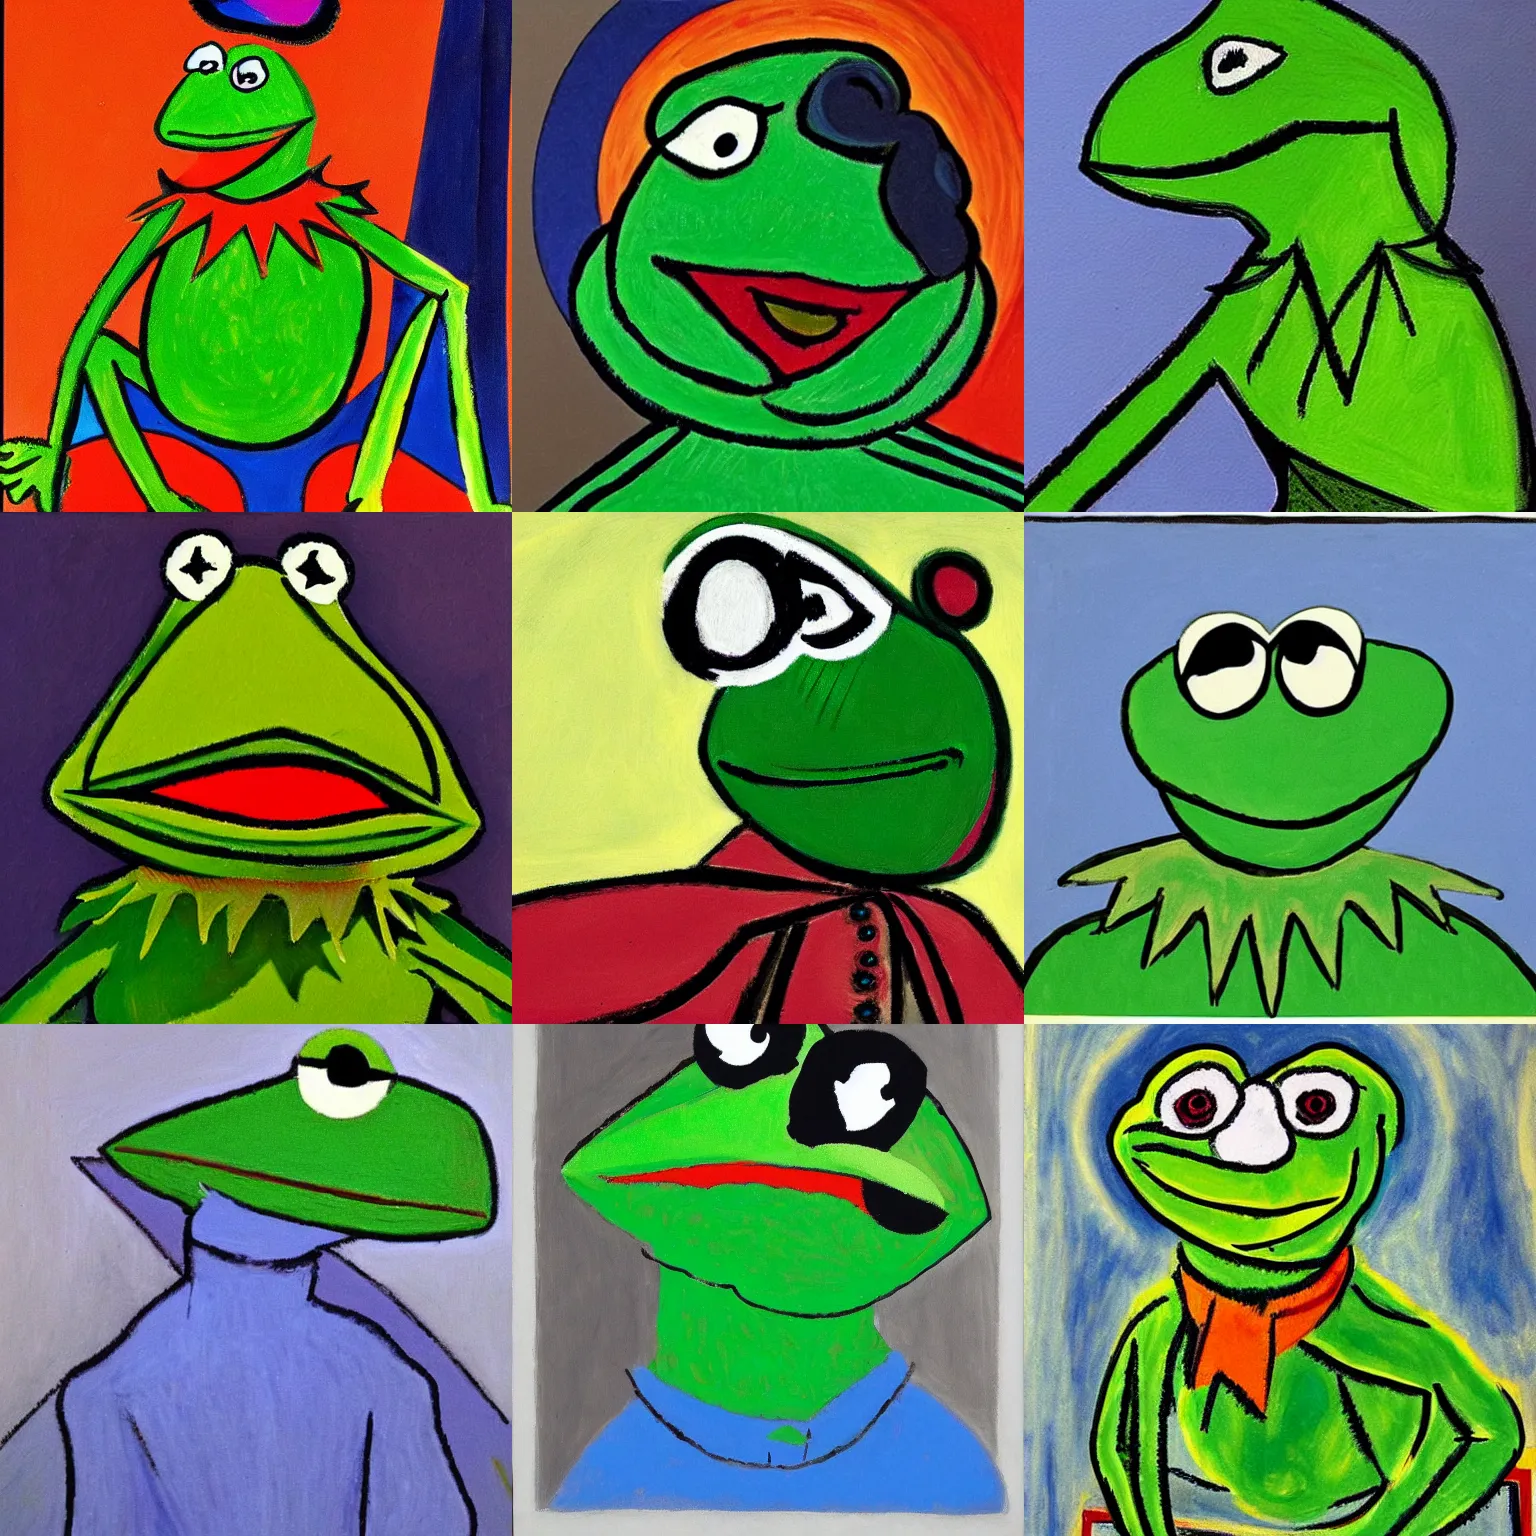 Prompt: A portrait of Kermit the Frog painted by Pablo Picasso